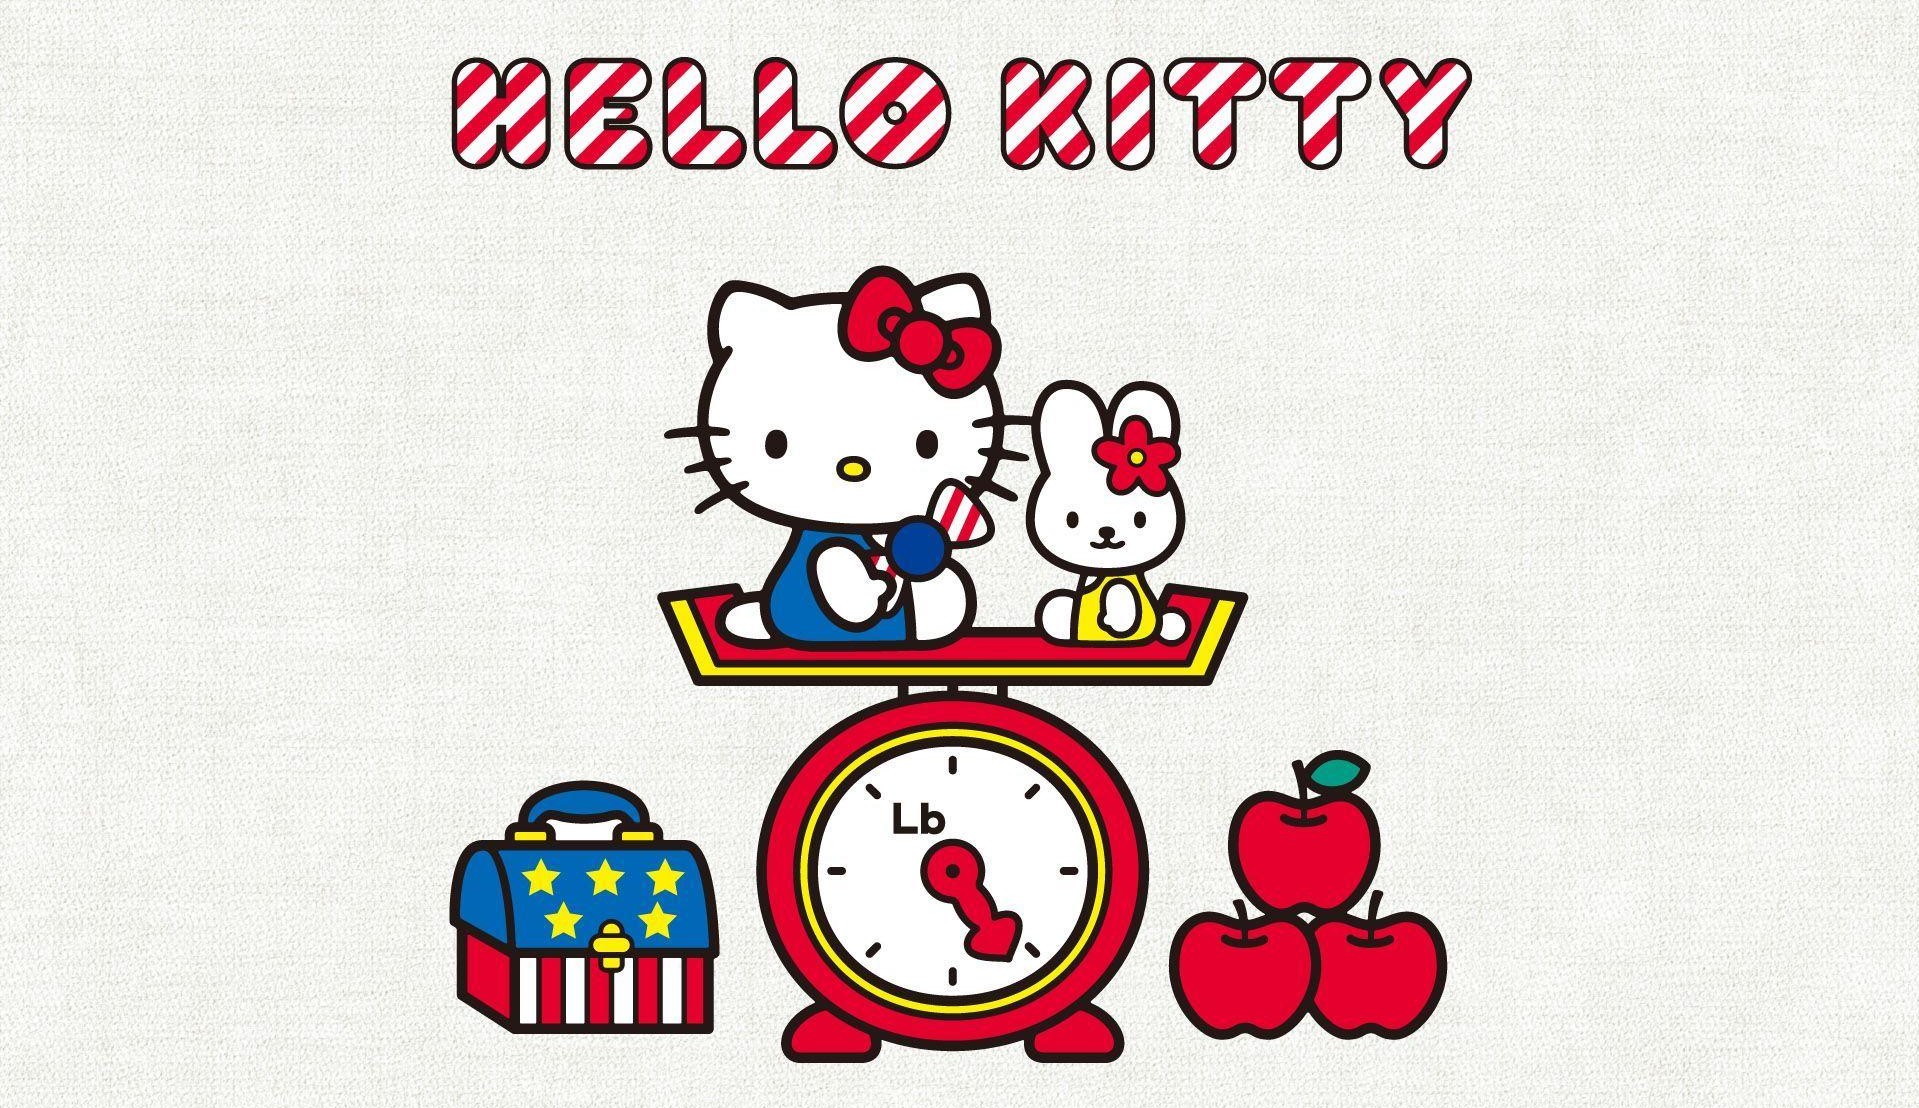 Pin by Angelmom4 on More Wallz  Hello kitty wallpaper Hello kitty  iphone wallpaper Hello kitty backgrounds